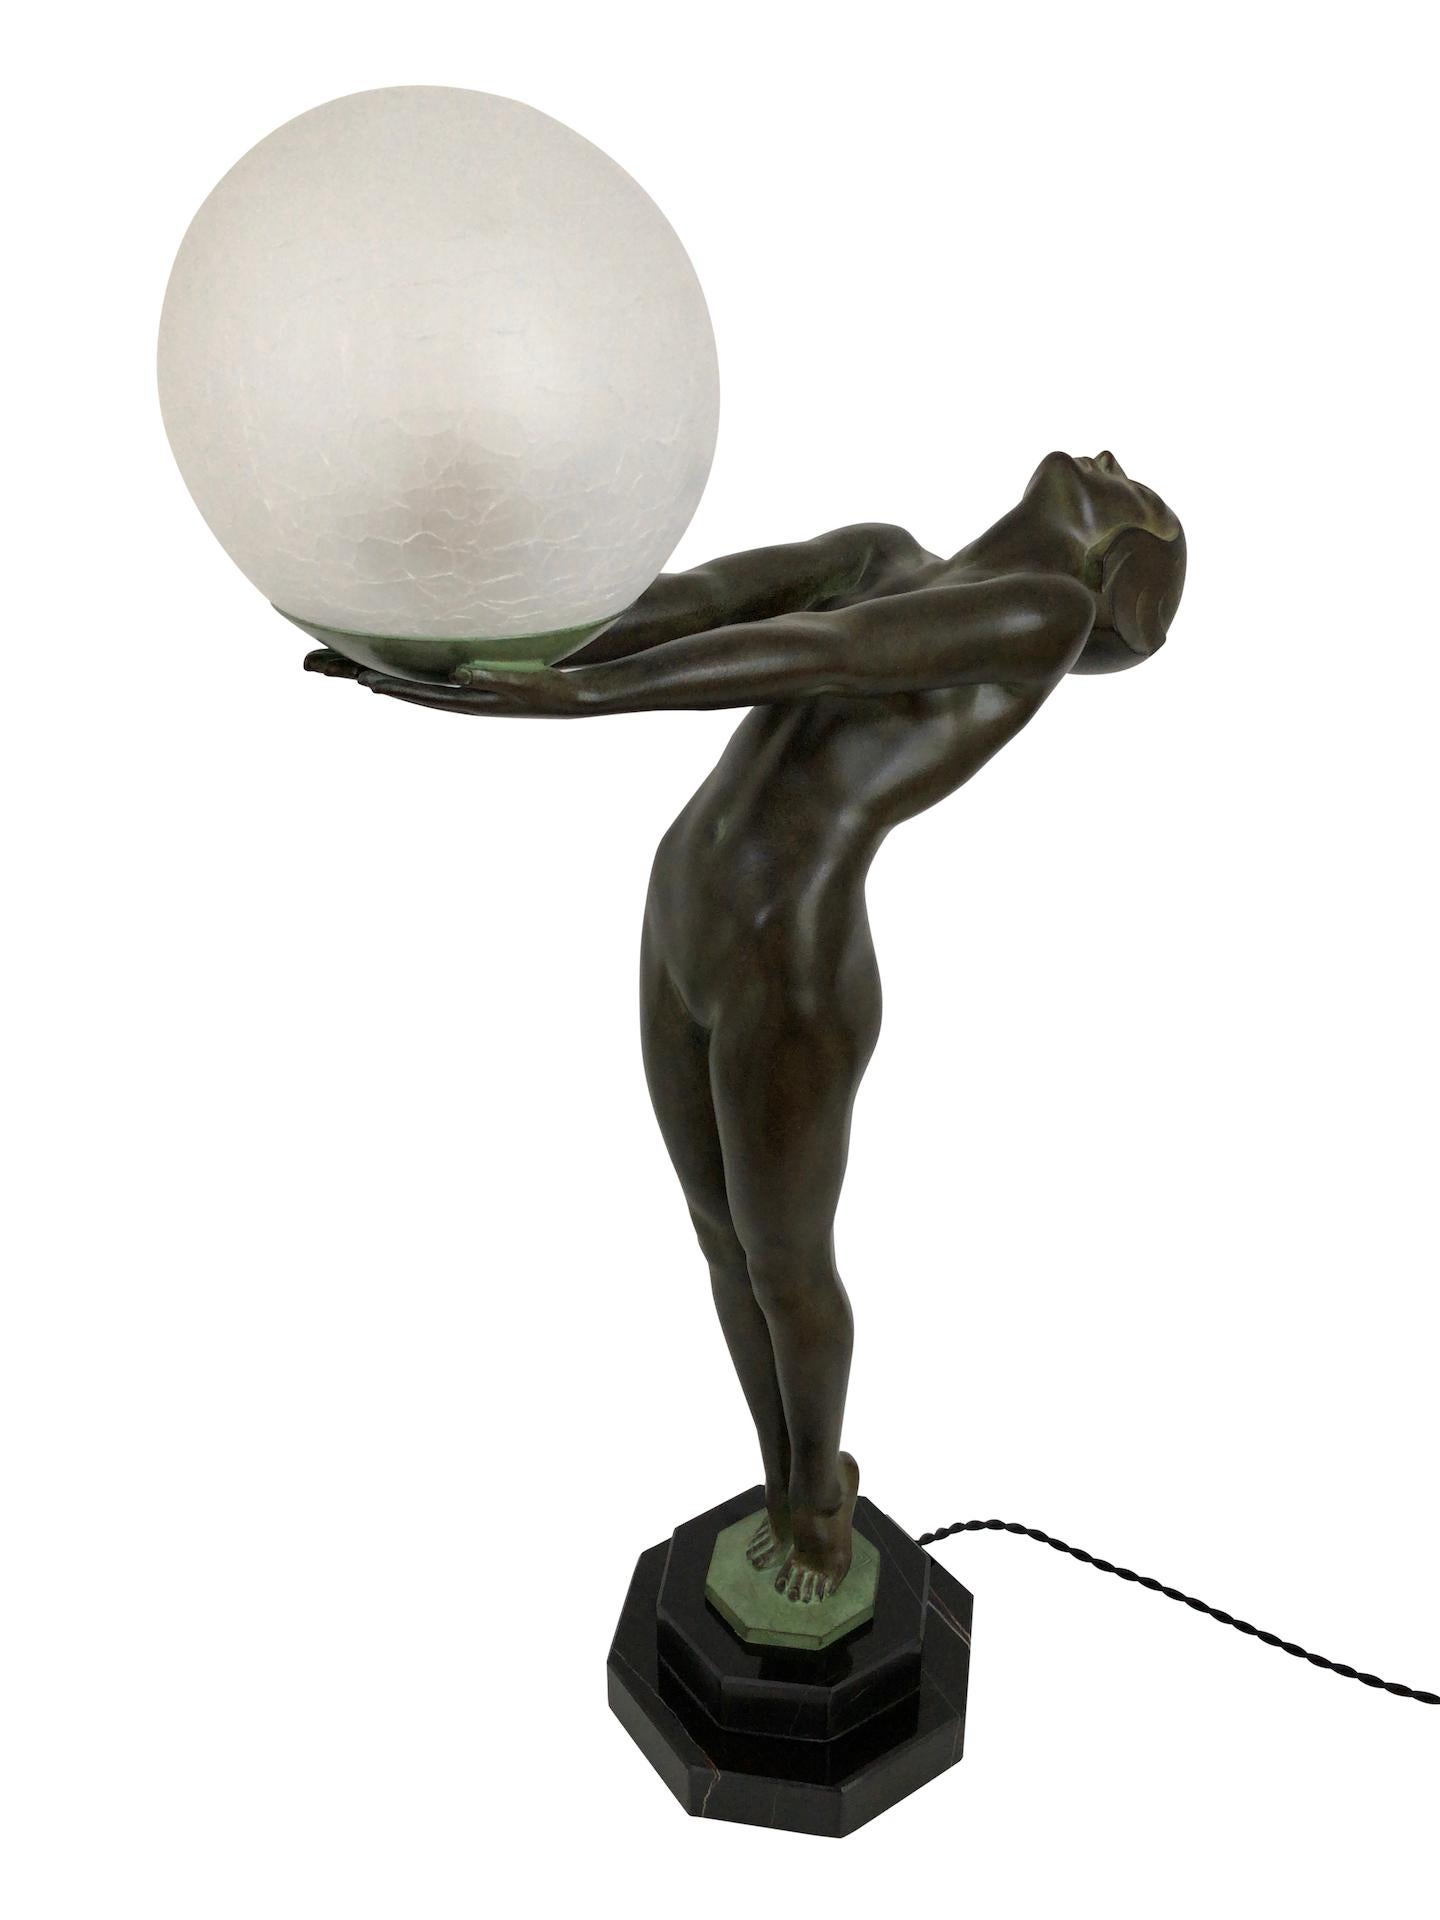 French Art Deco Lumina Sculpture Clarté Lamp Nude Dancer with a Ball by Max Le Verrier For Sale